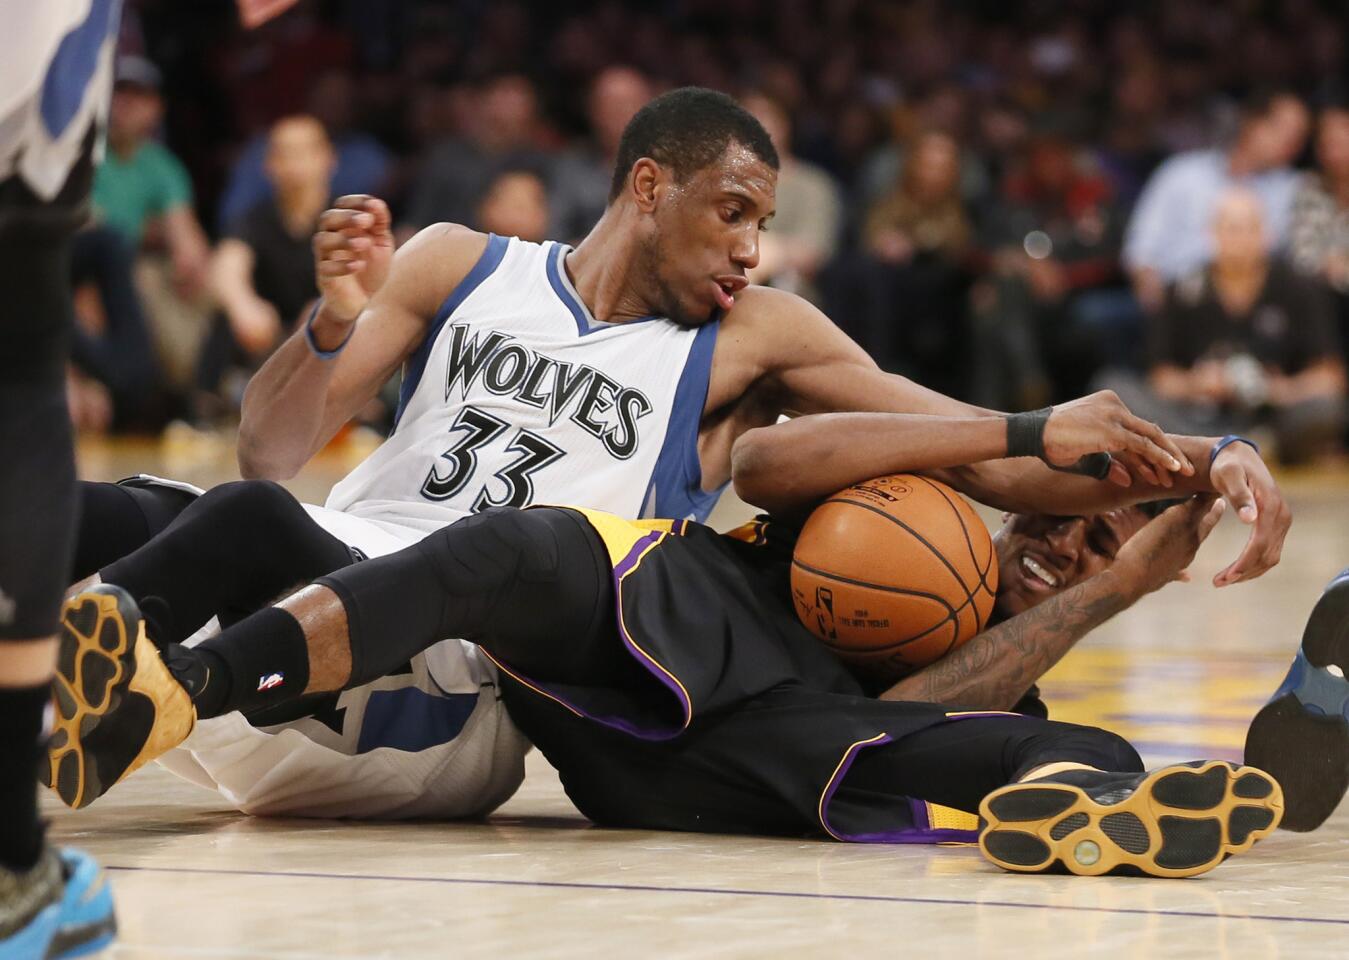 Lakers guard Nick Young and Timberwolves forward Thaddeus Young battle for a loose ball in the second half.